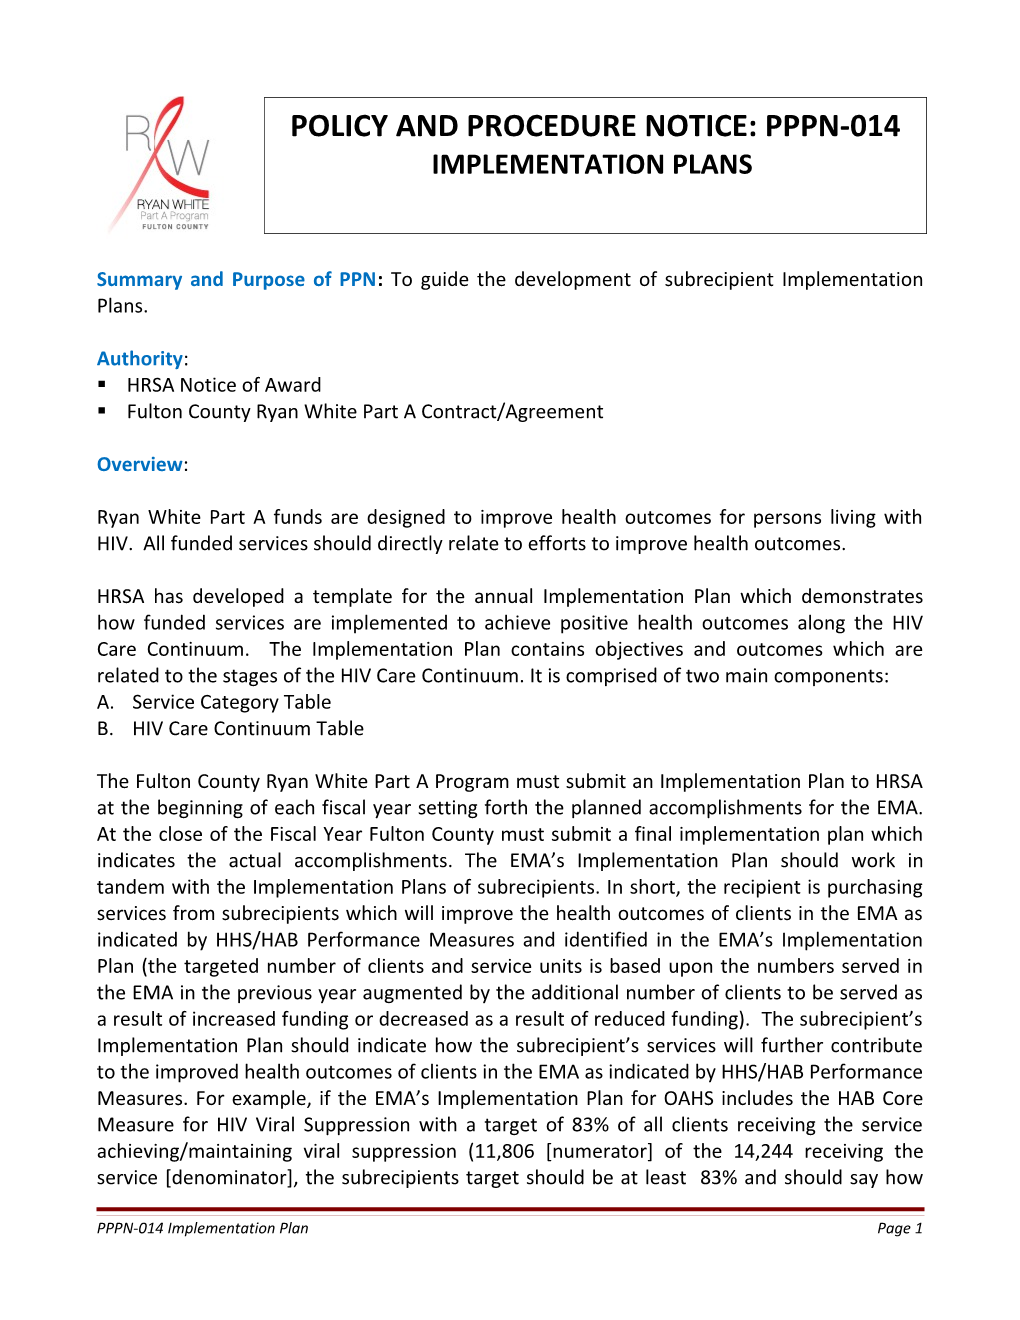 Summary and Purpose of PPN: to Guide the Development of Subrecipient Implementation Plans